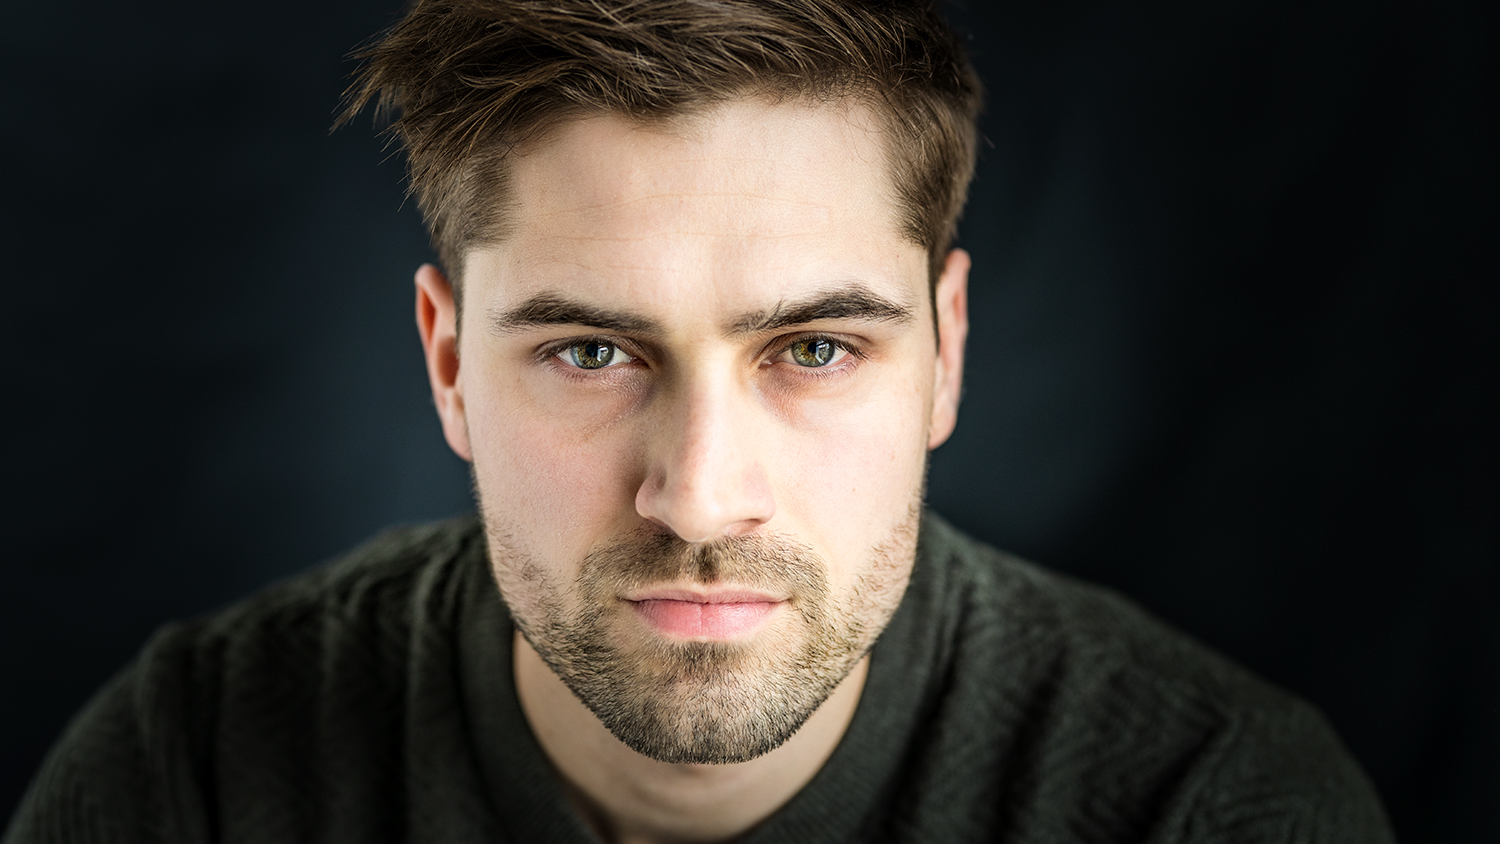 Headshot of man with stubble and green eyes